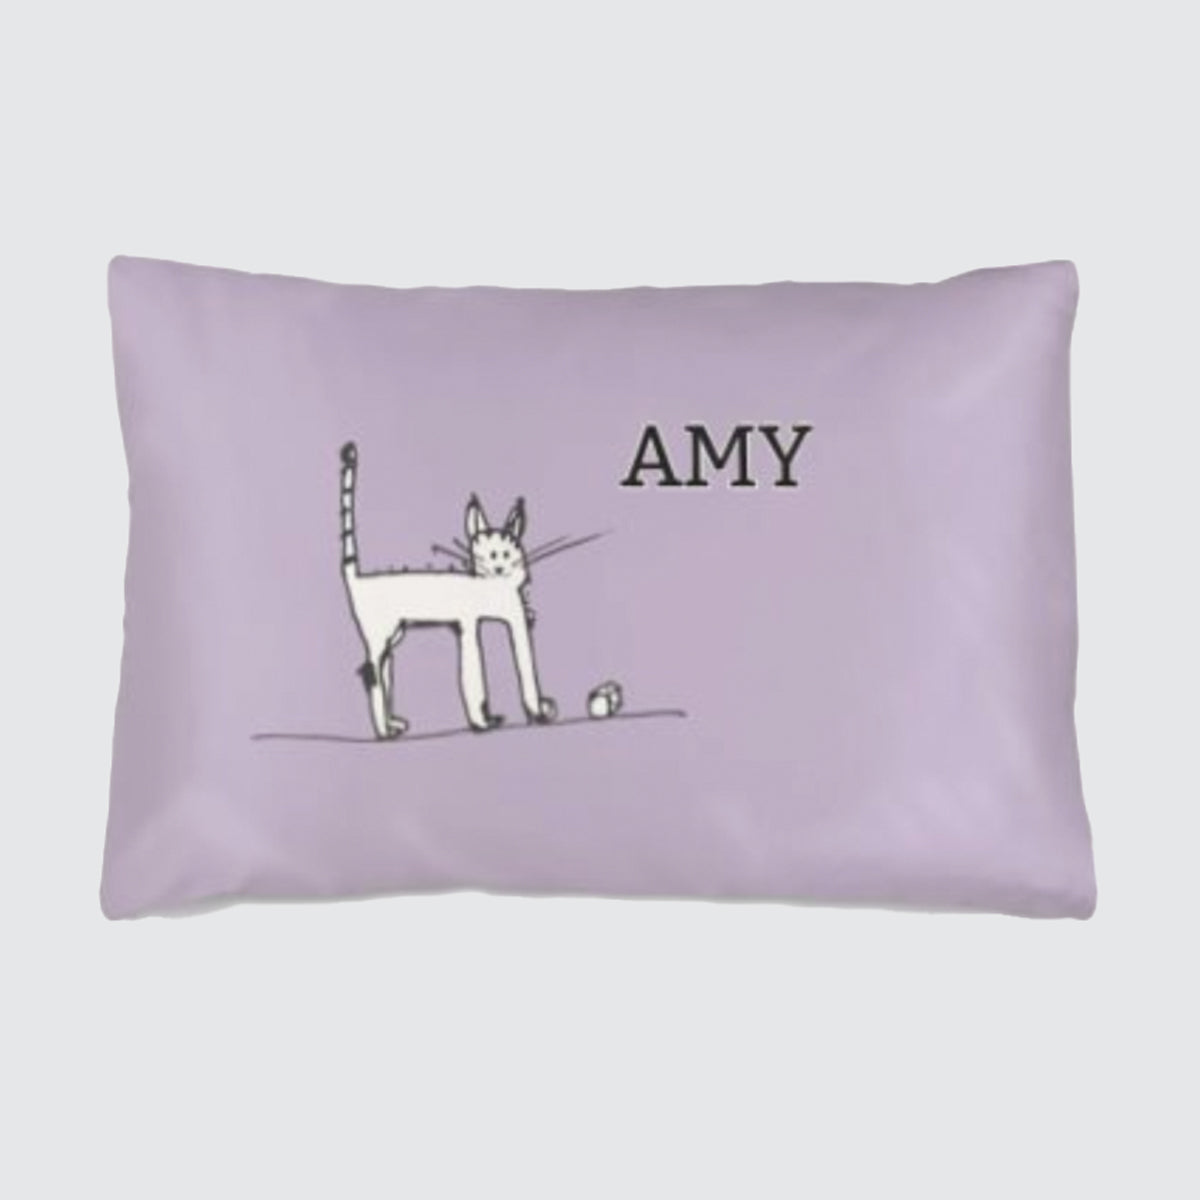 Silk Pillowcase - Personalised with a Name - Nills Cat with Dice on Lavender